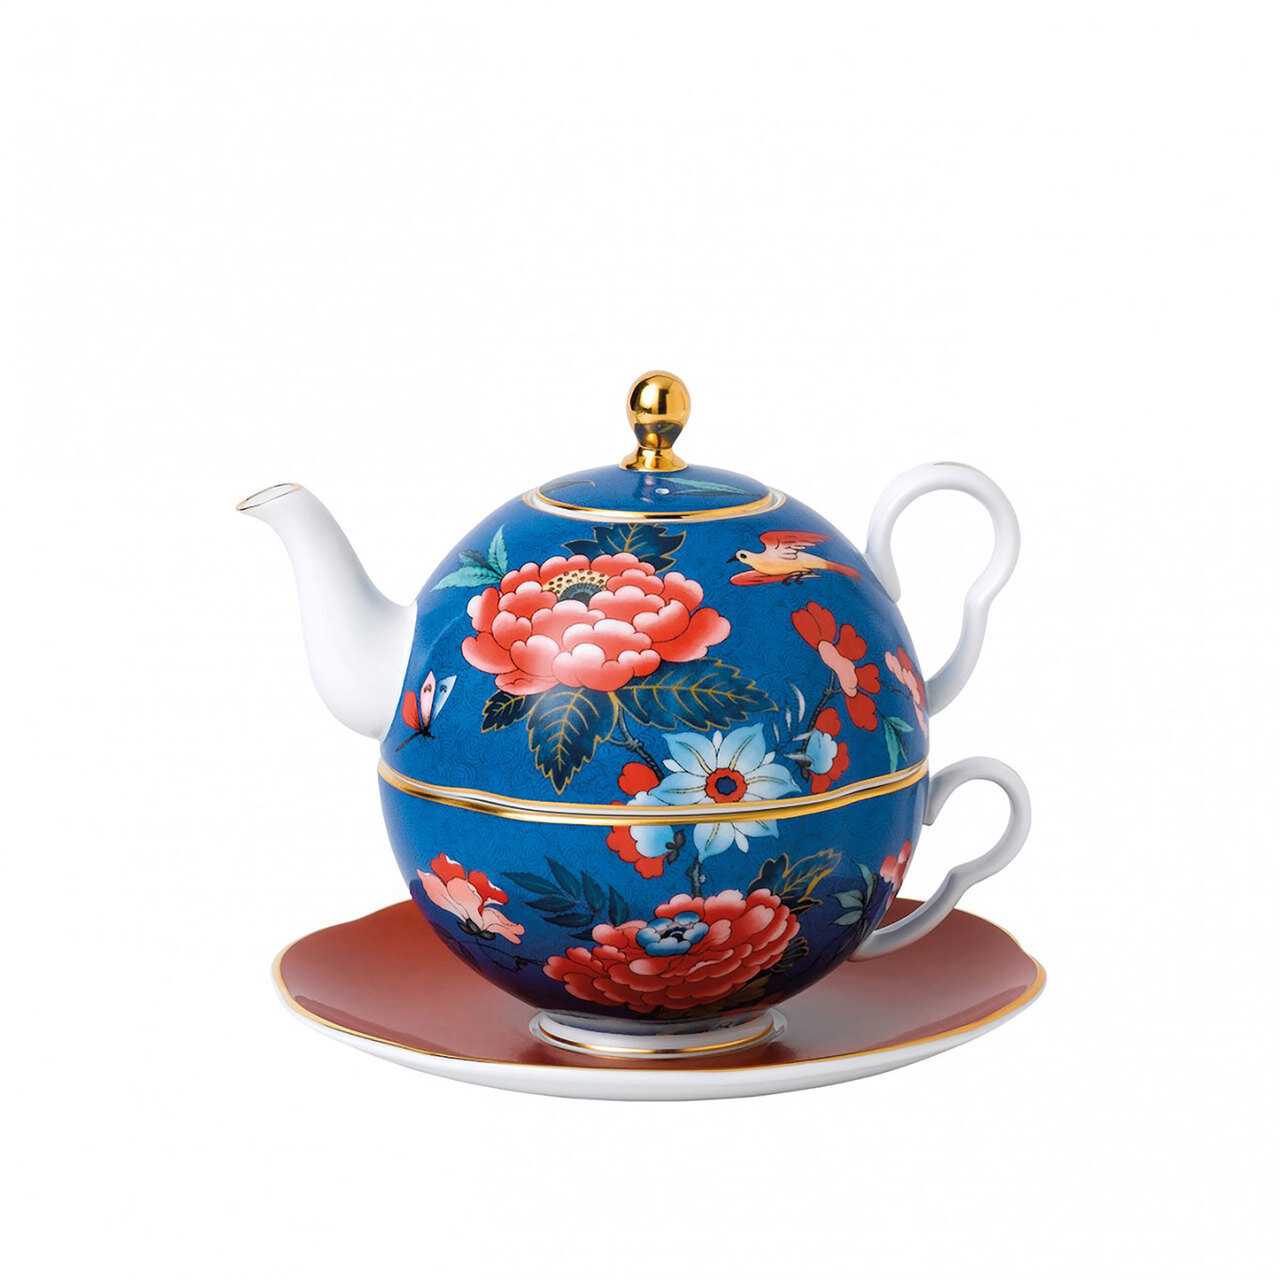 Wedgwood Paeonia Blush Tea For One (Blue & Red) 40032128